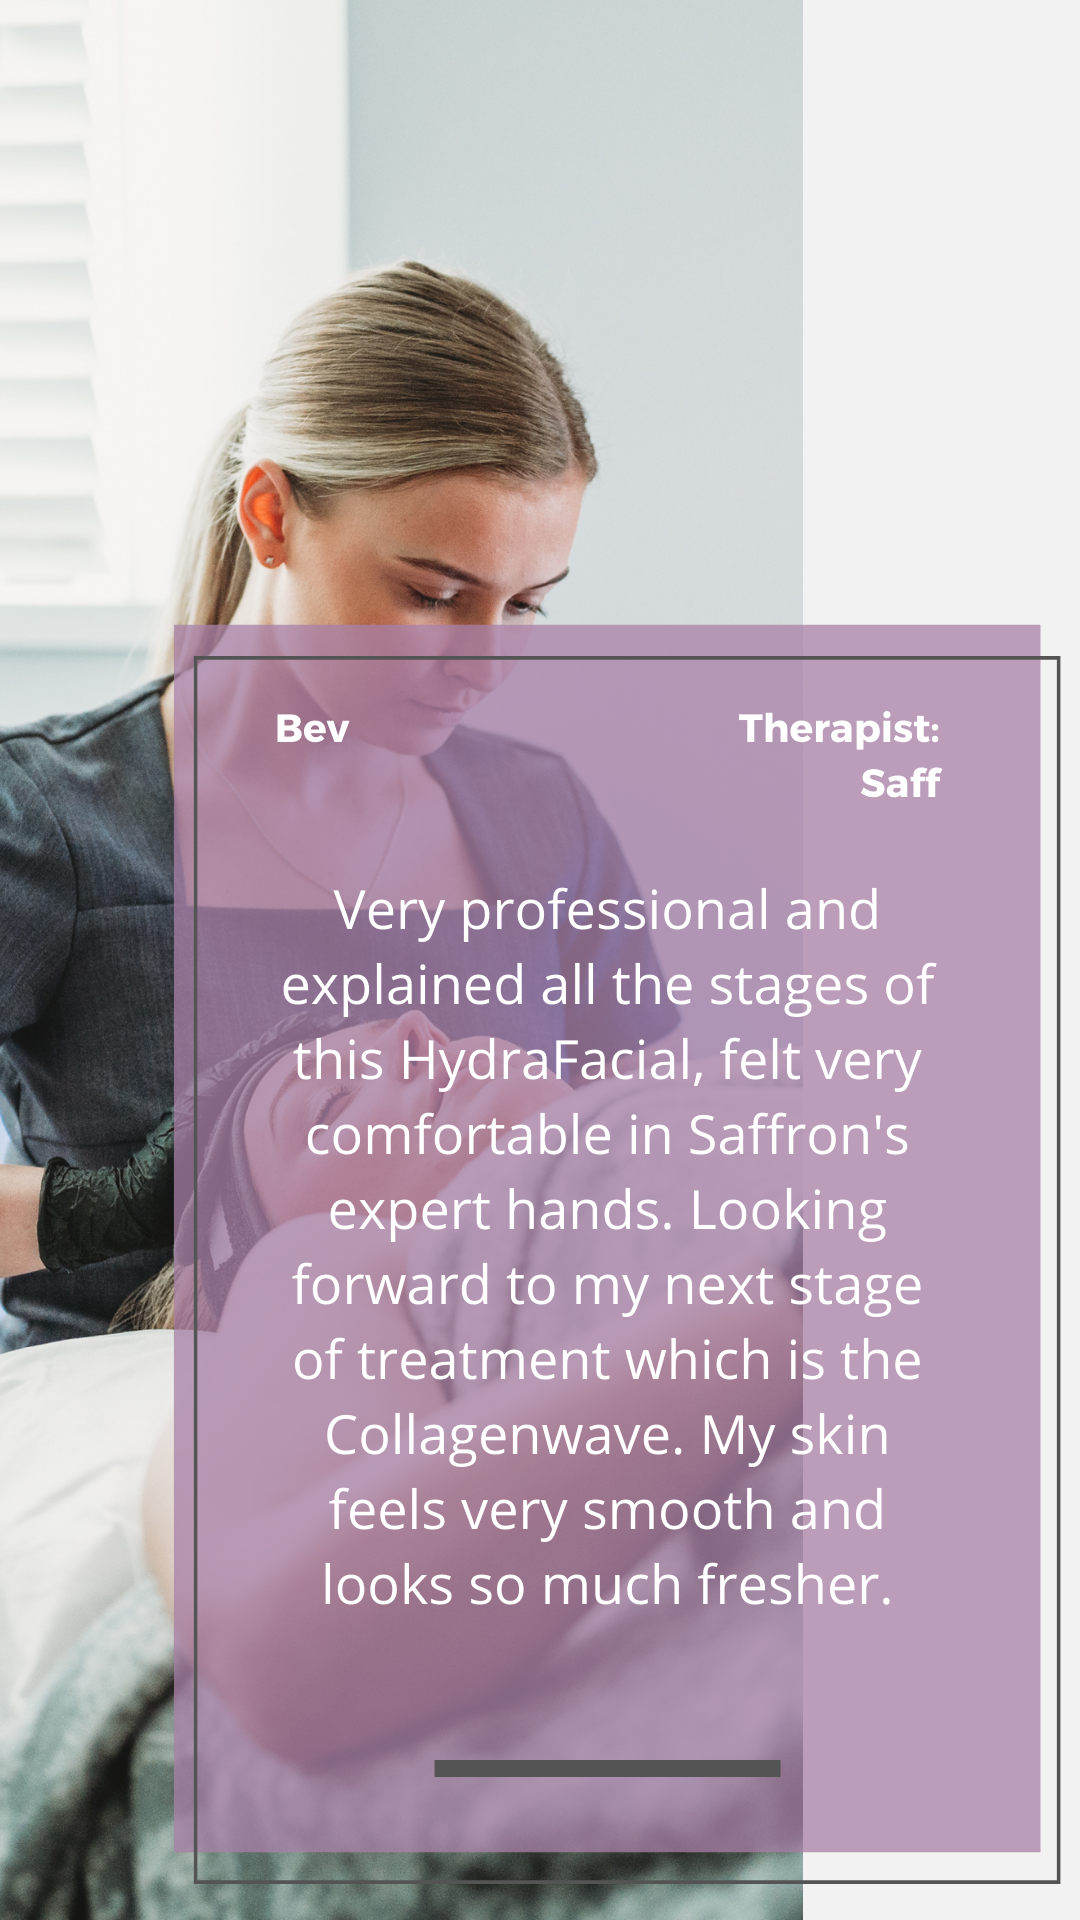 Had a HydraFacial with Erica today and she was so lovely. Talked me through every stage of the facial, answered any questions I had and made me feel extremely comfortable. Great experience and a great place! (3).png